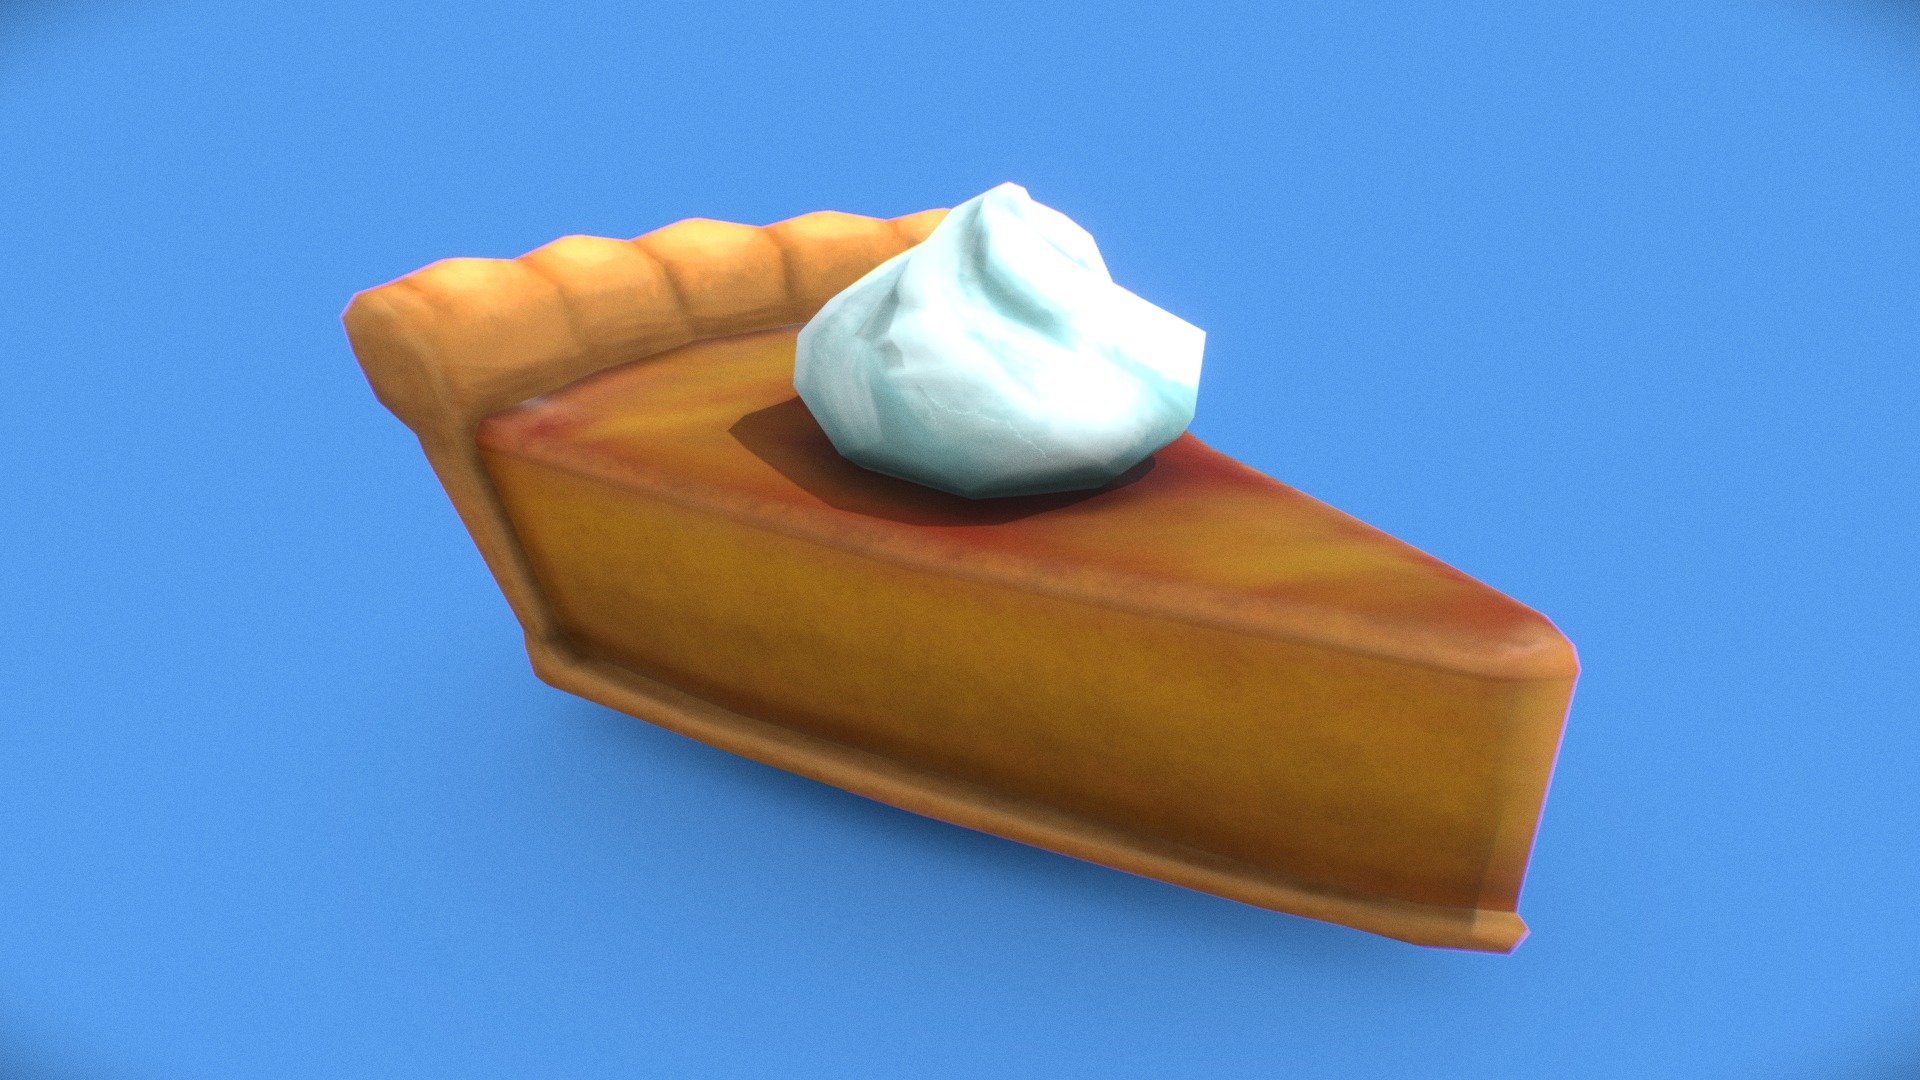 For today's 3December prompt, I made a slice of pumpkin pie. Modelled in Blender and textured in Substance Painter. Timelapse and renders at: https://www.artstation.com/artwork/ykXbQ8 3d model